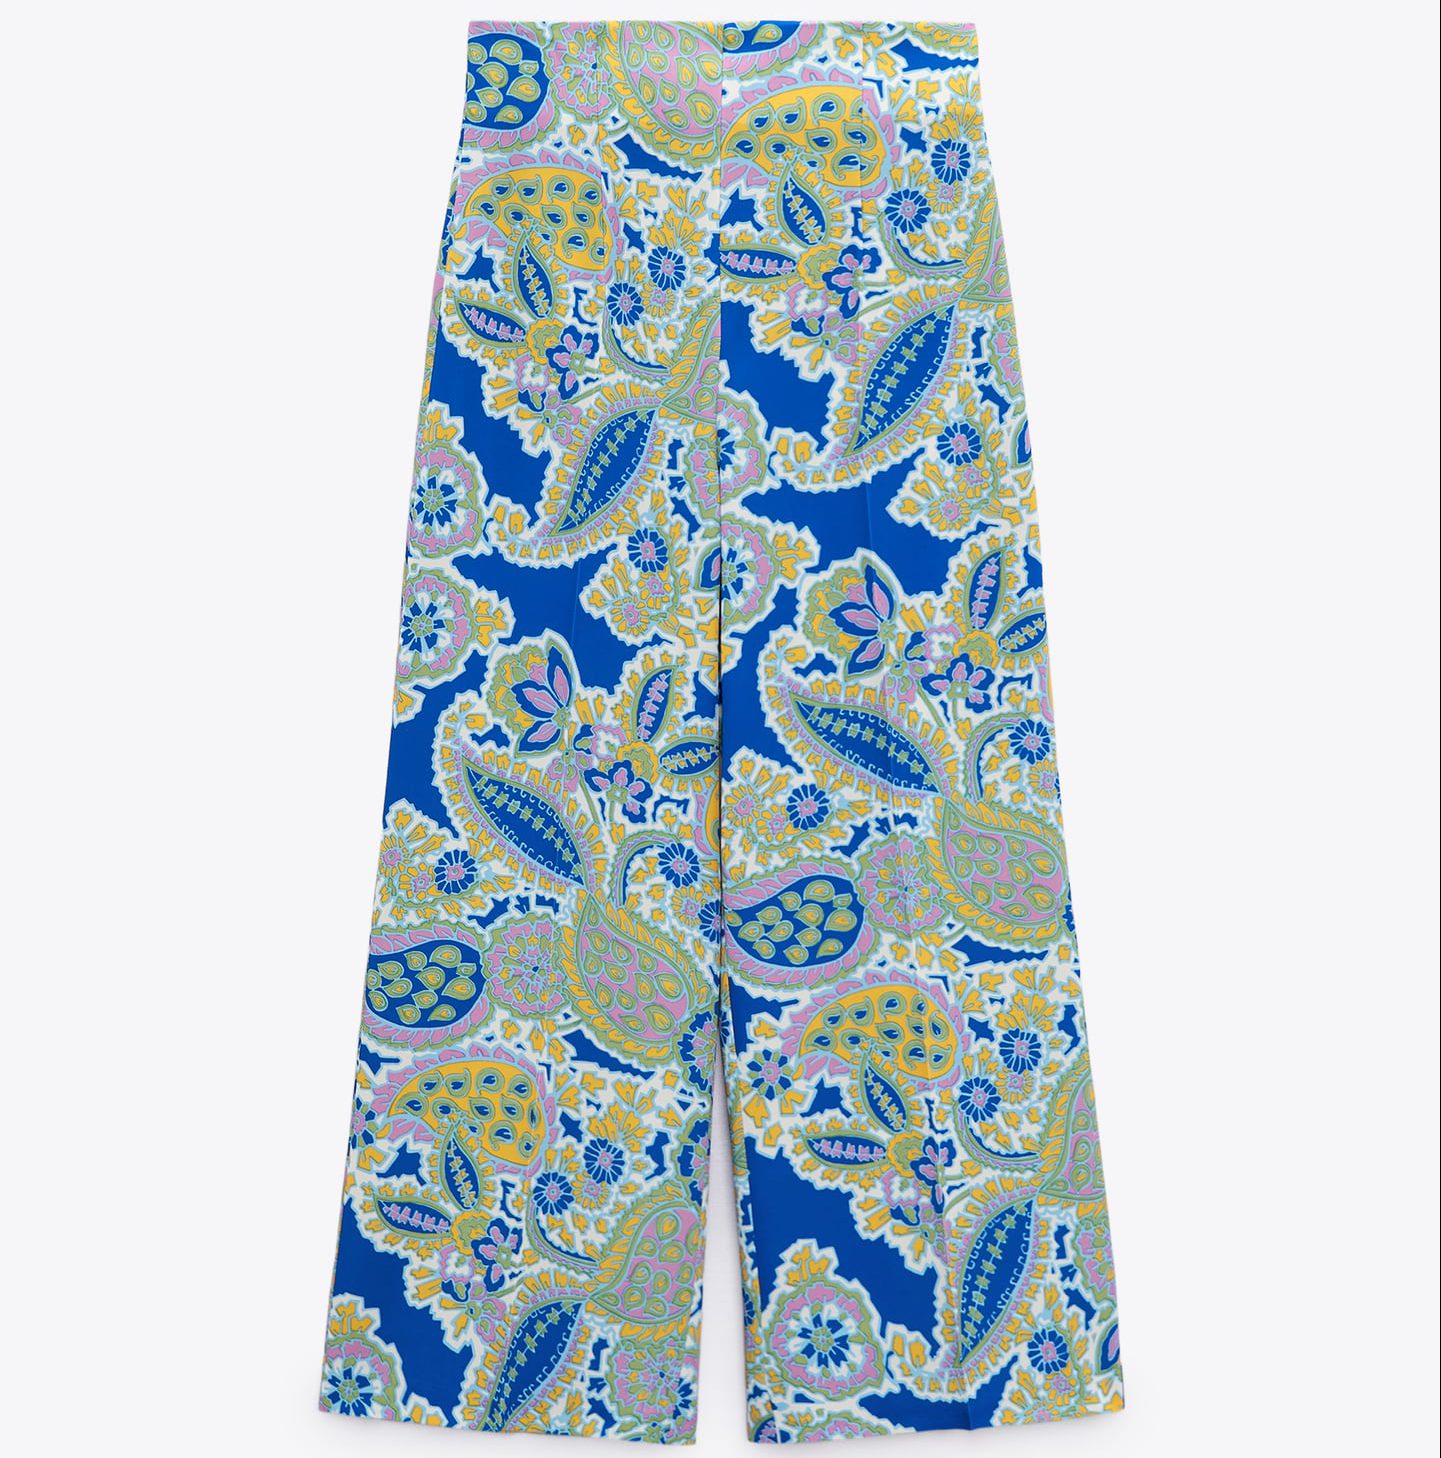 Flowy Culottes and Printed Blouse by Zara